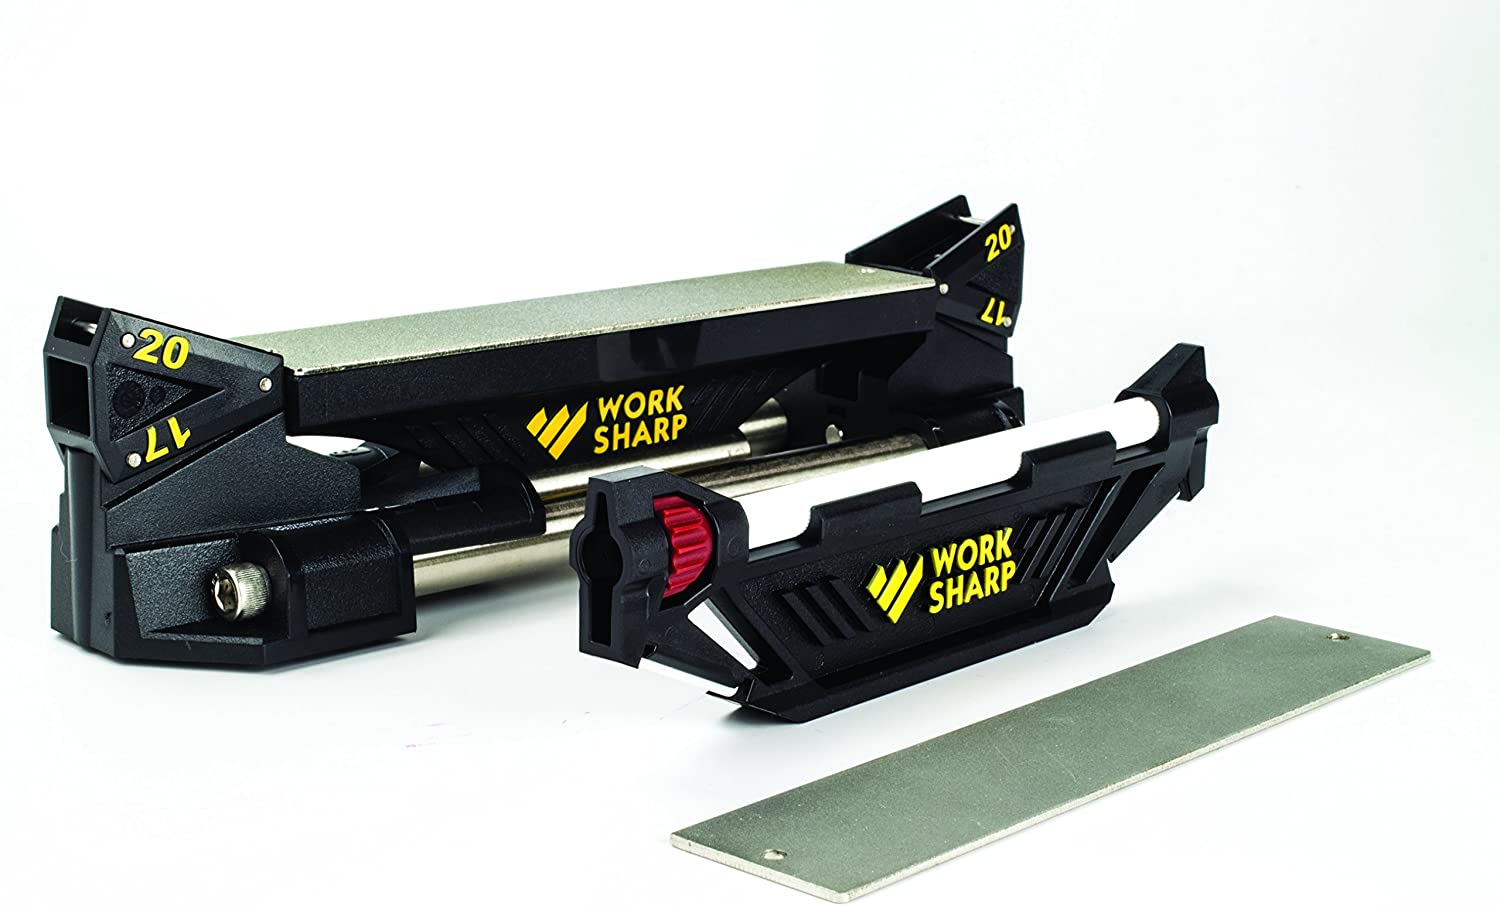 Work Sharp guided sharpening system